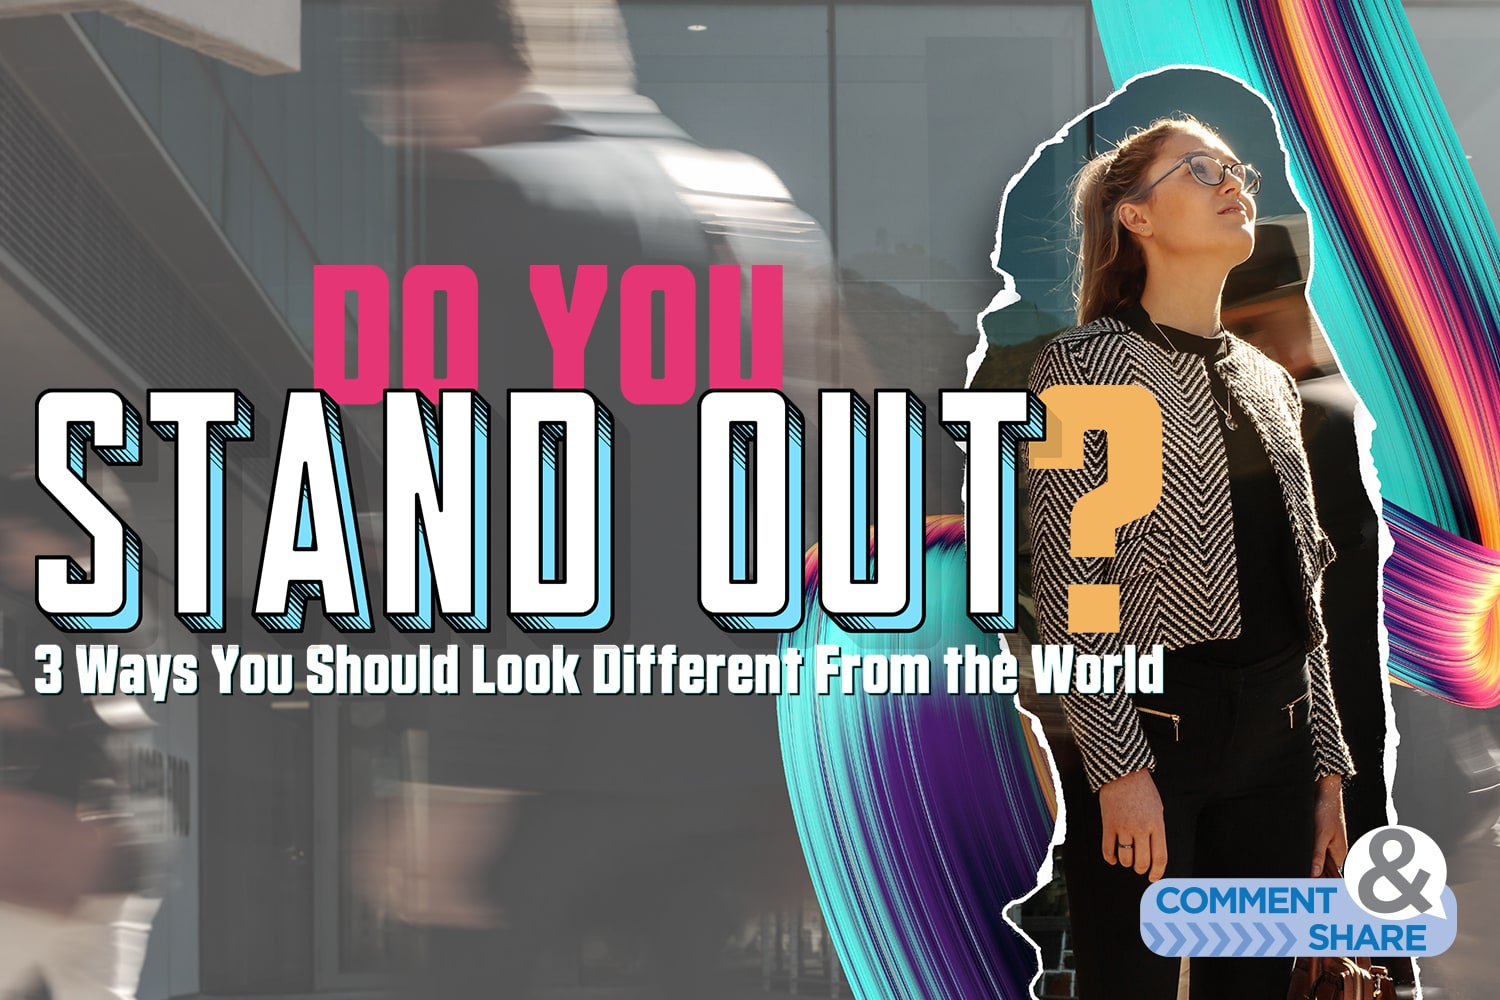 https://blog.kcm.org/do-you-stand-out-3-ways-you-should-look-different-from-the-world